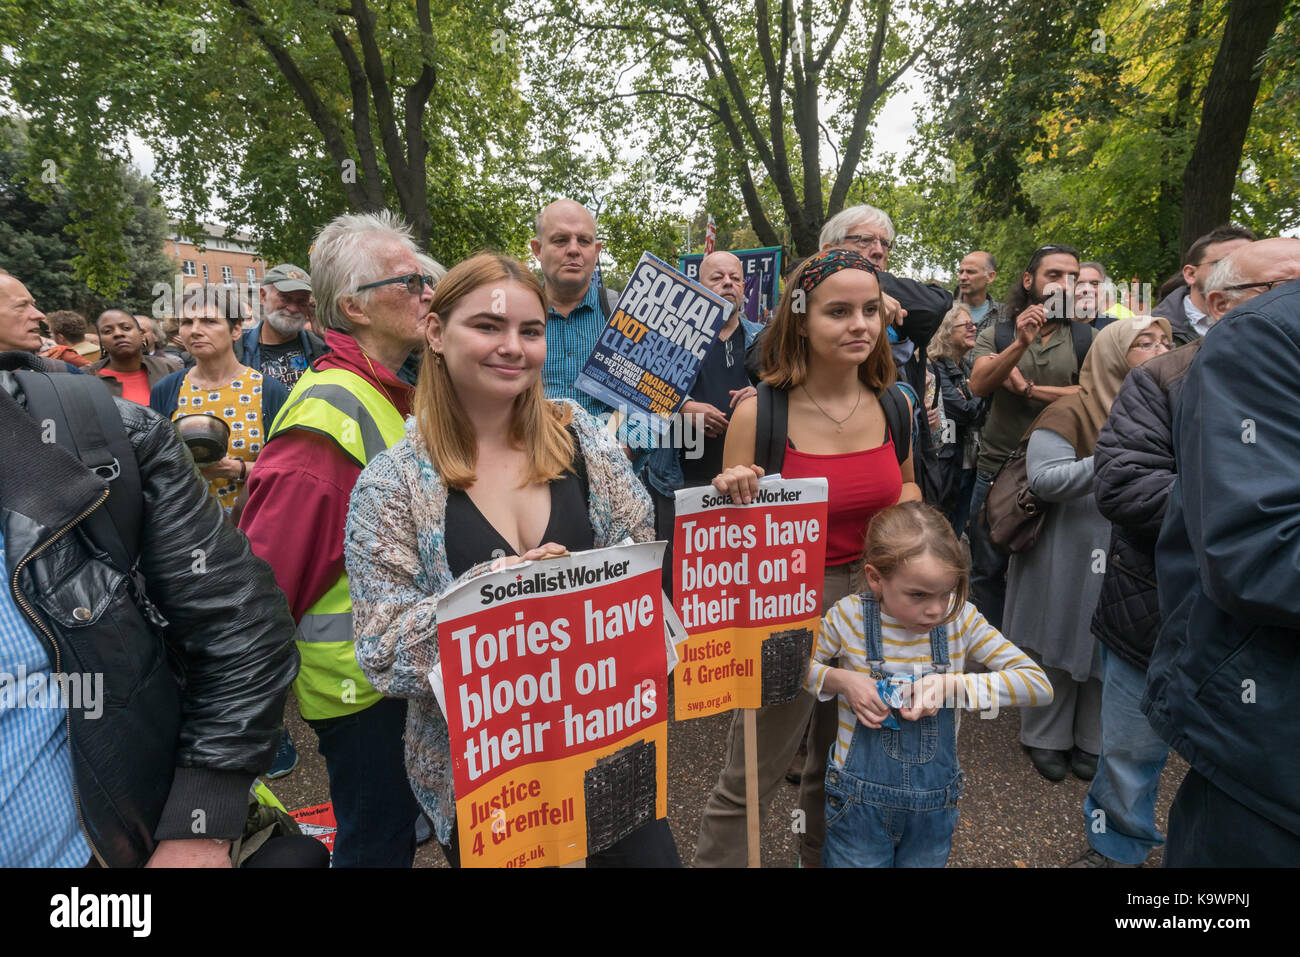 London, UK. 23rd Sep, 2017. London, UK. 23rd September 2017. Hundreds listen to speeches at the rally in Tottenham before marching to Finsbury Park against the so called Haringey Development Vehicle, under which Haringey Council is making a huge transfer of council housing to Australian multinational Lendlease. This will result in the imminent demolition of over 1,300 council homes on the Northumberland Park estate, followed by similar loss of social housing across the whole of the borough. At Â£2 billion, his is the largest giveaway of council housing and assets to a private corporation Stock Photo